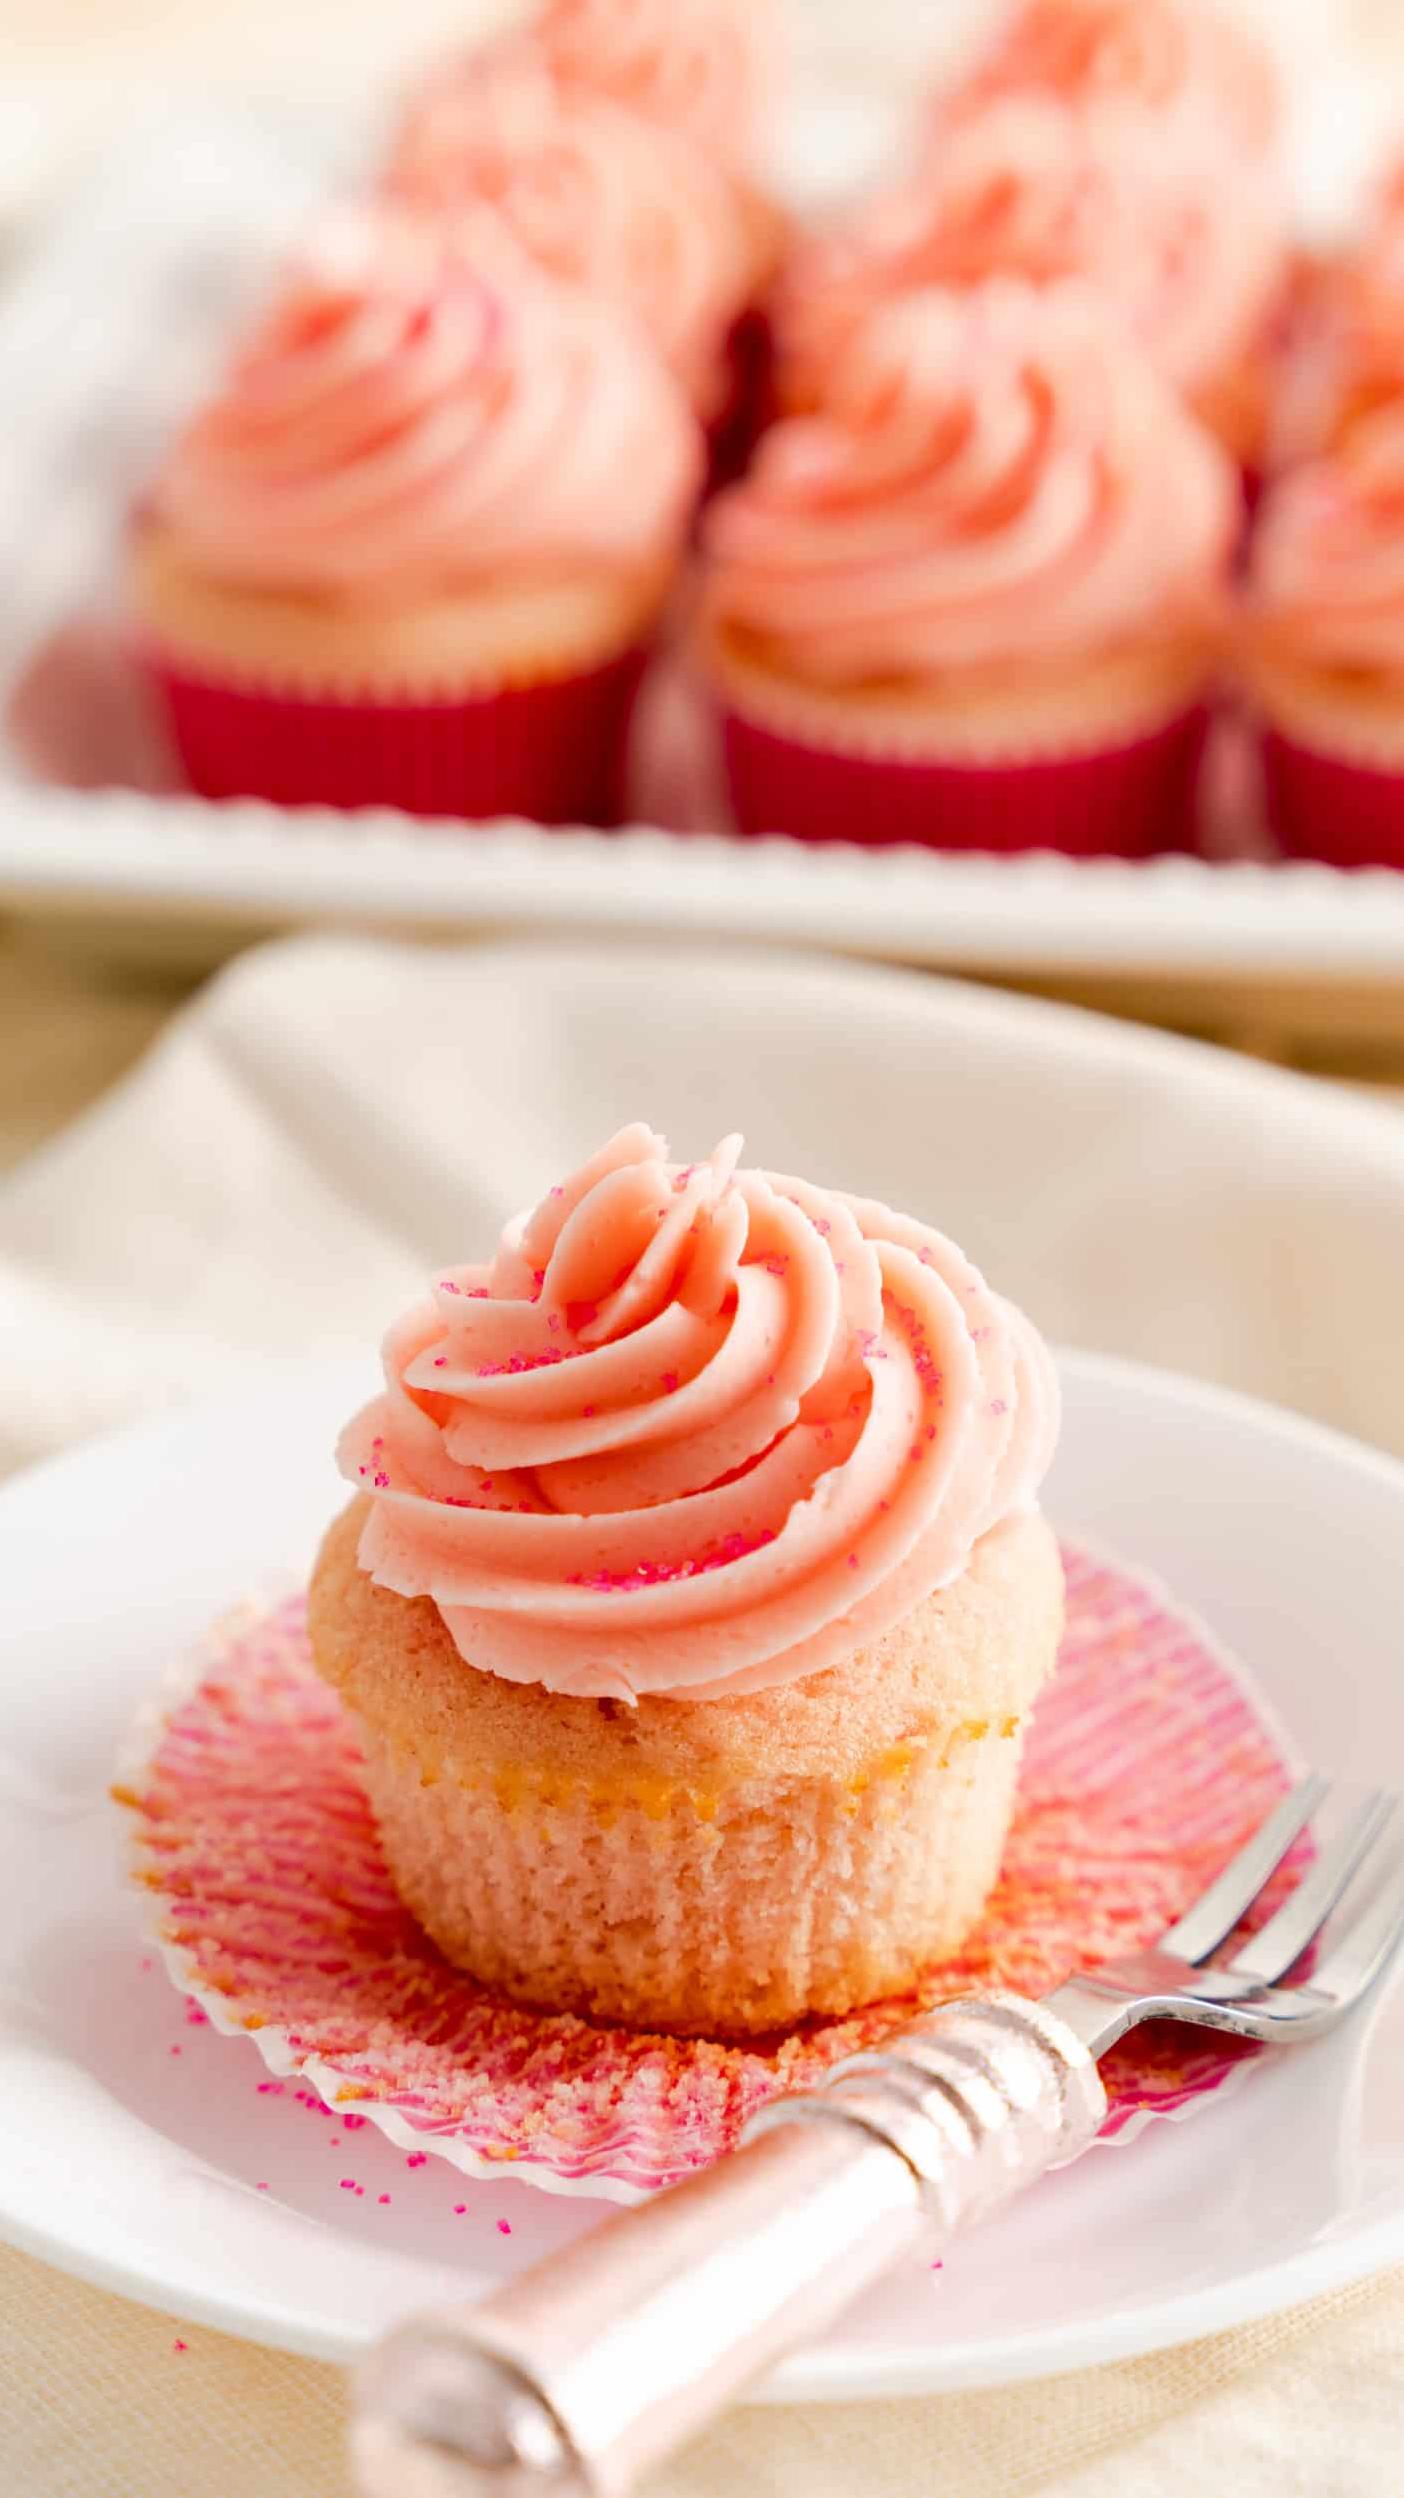  These cupcakes are so cute, you won't want to share them with anyone.